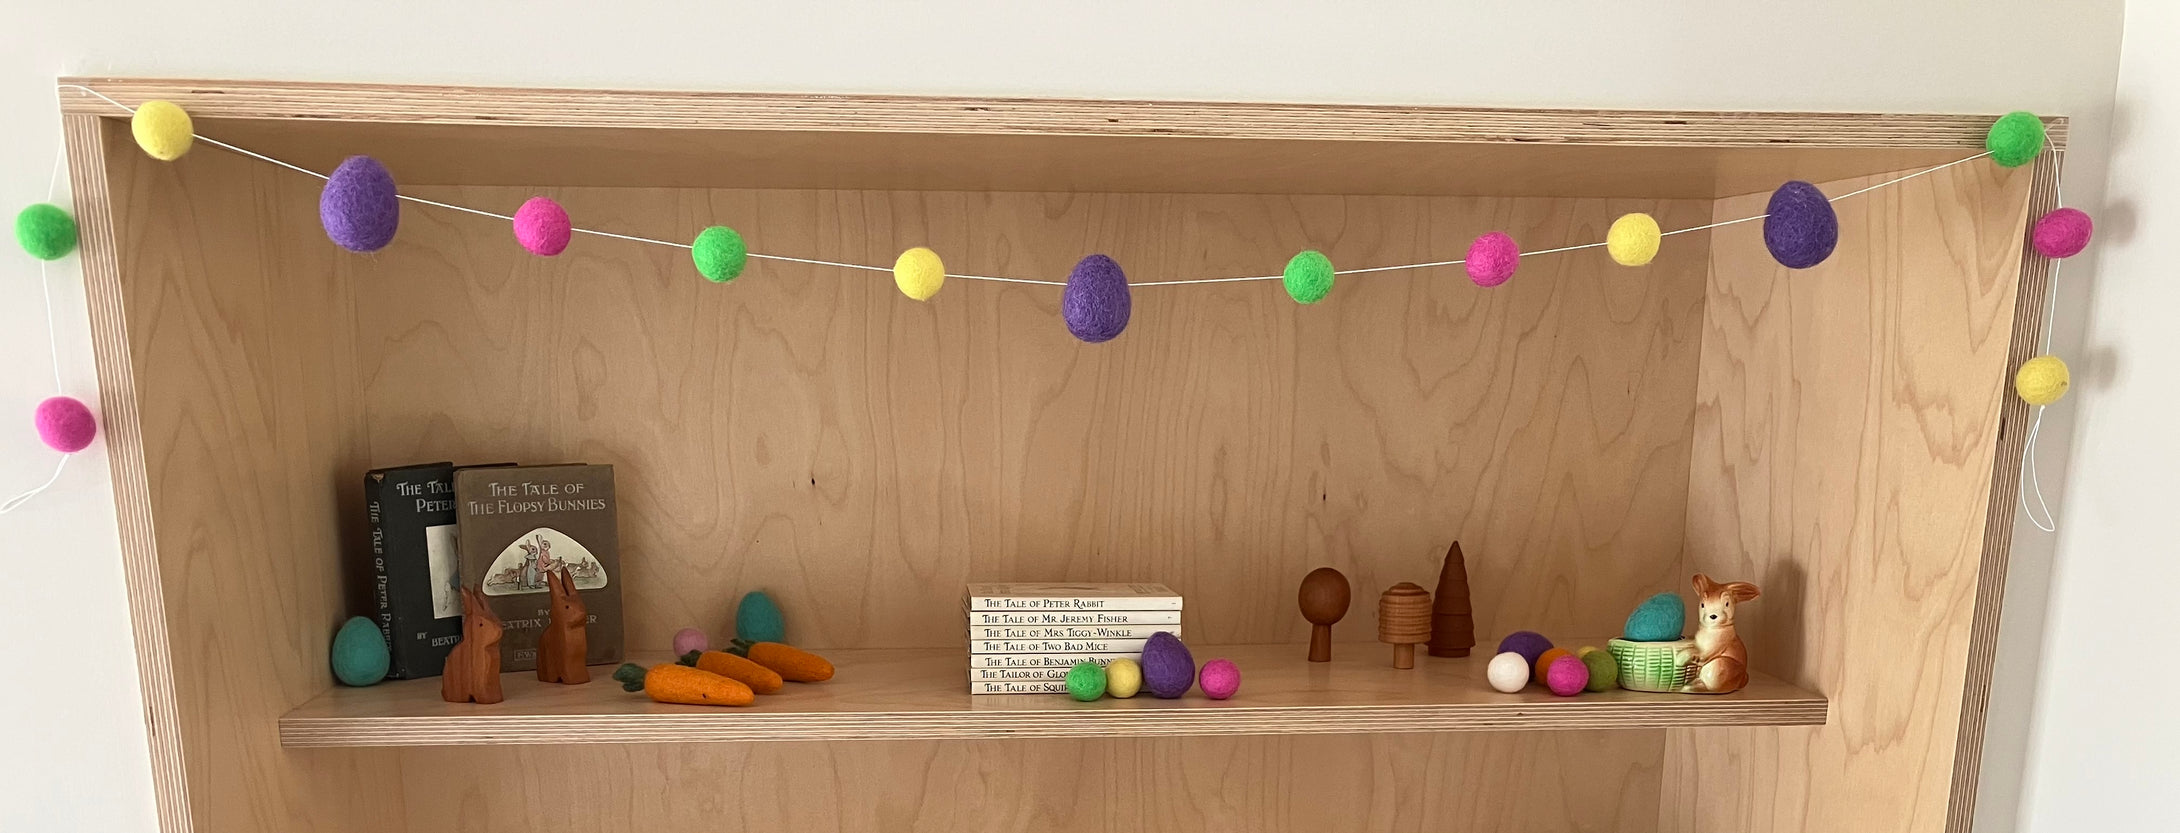 Bright Easter Garland